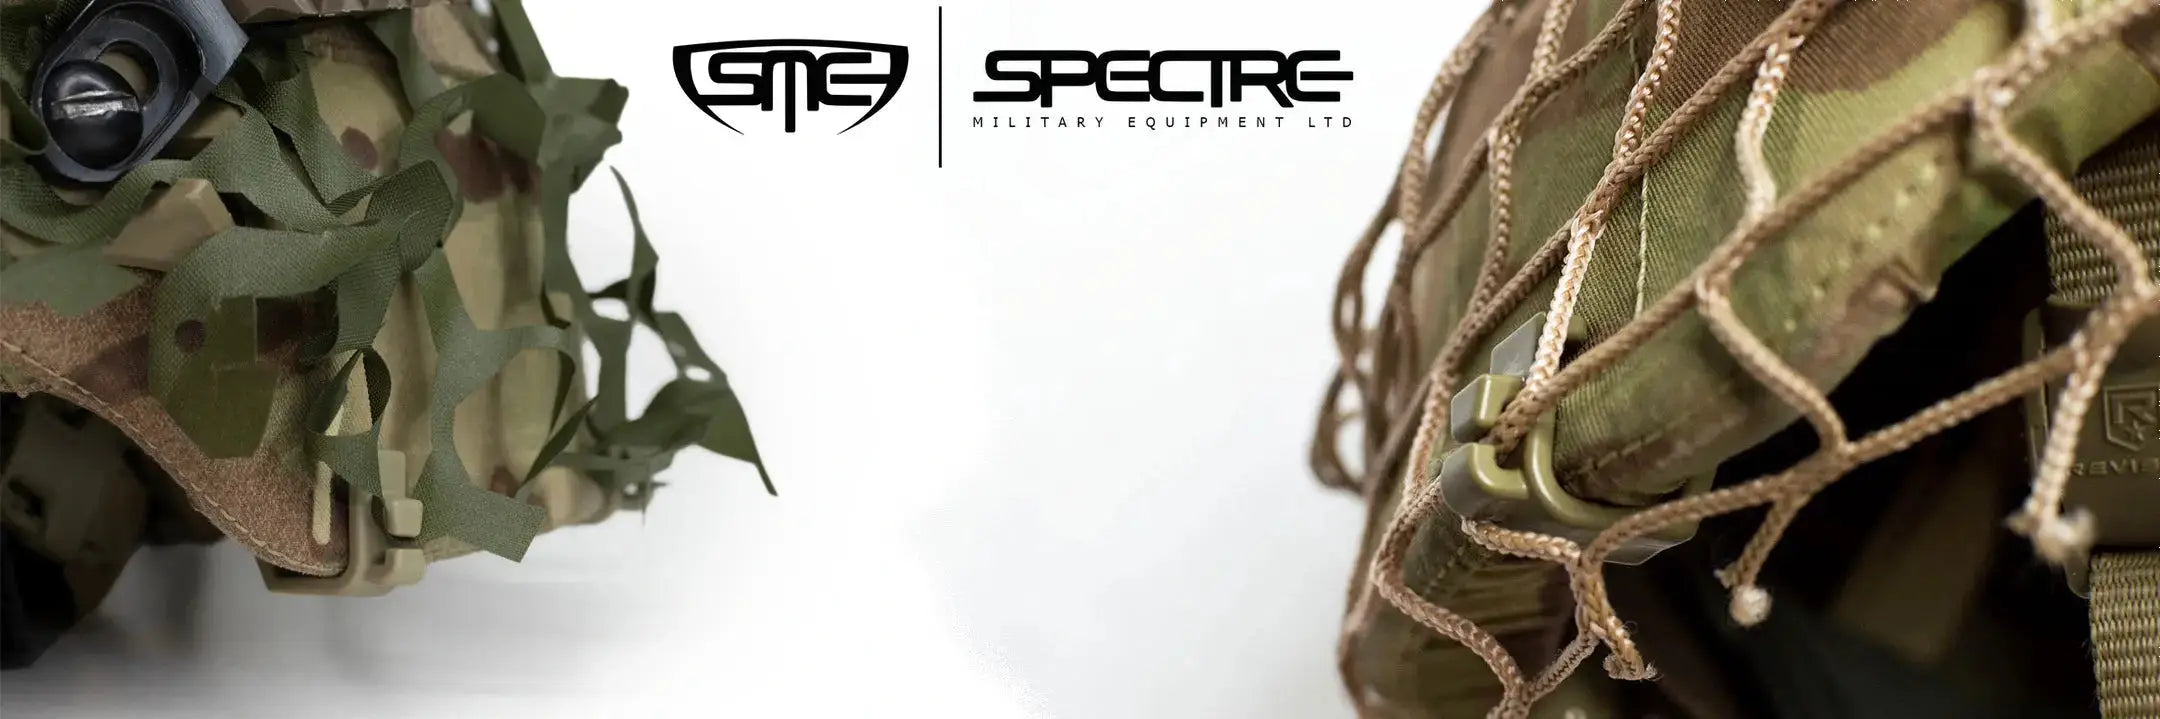 Spectre Military Quality you can Depend On